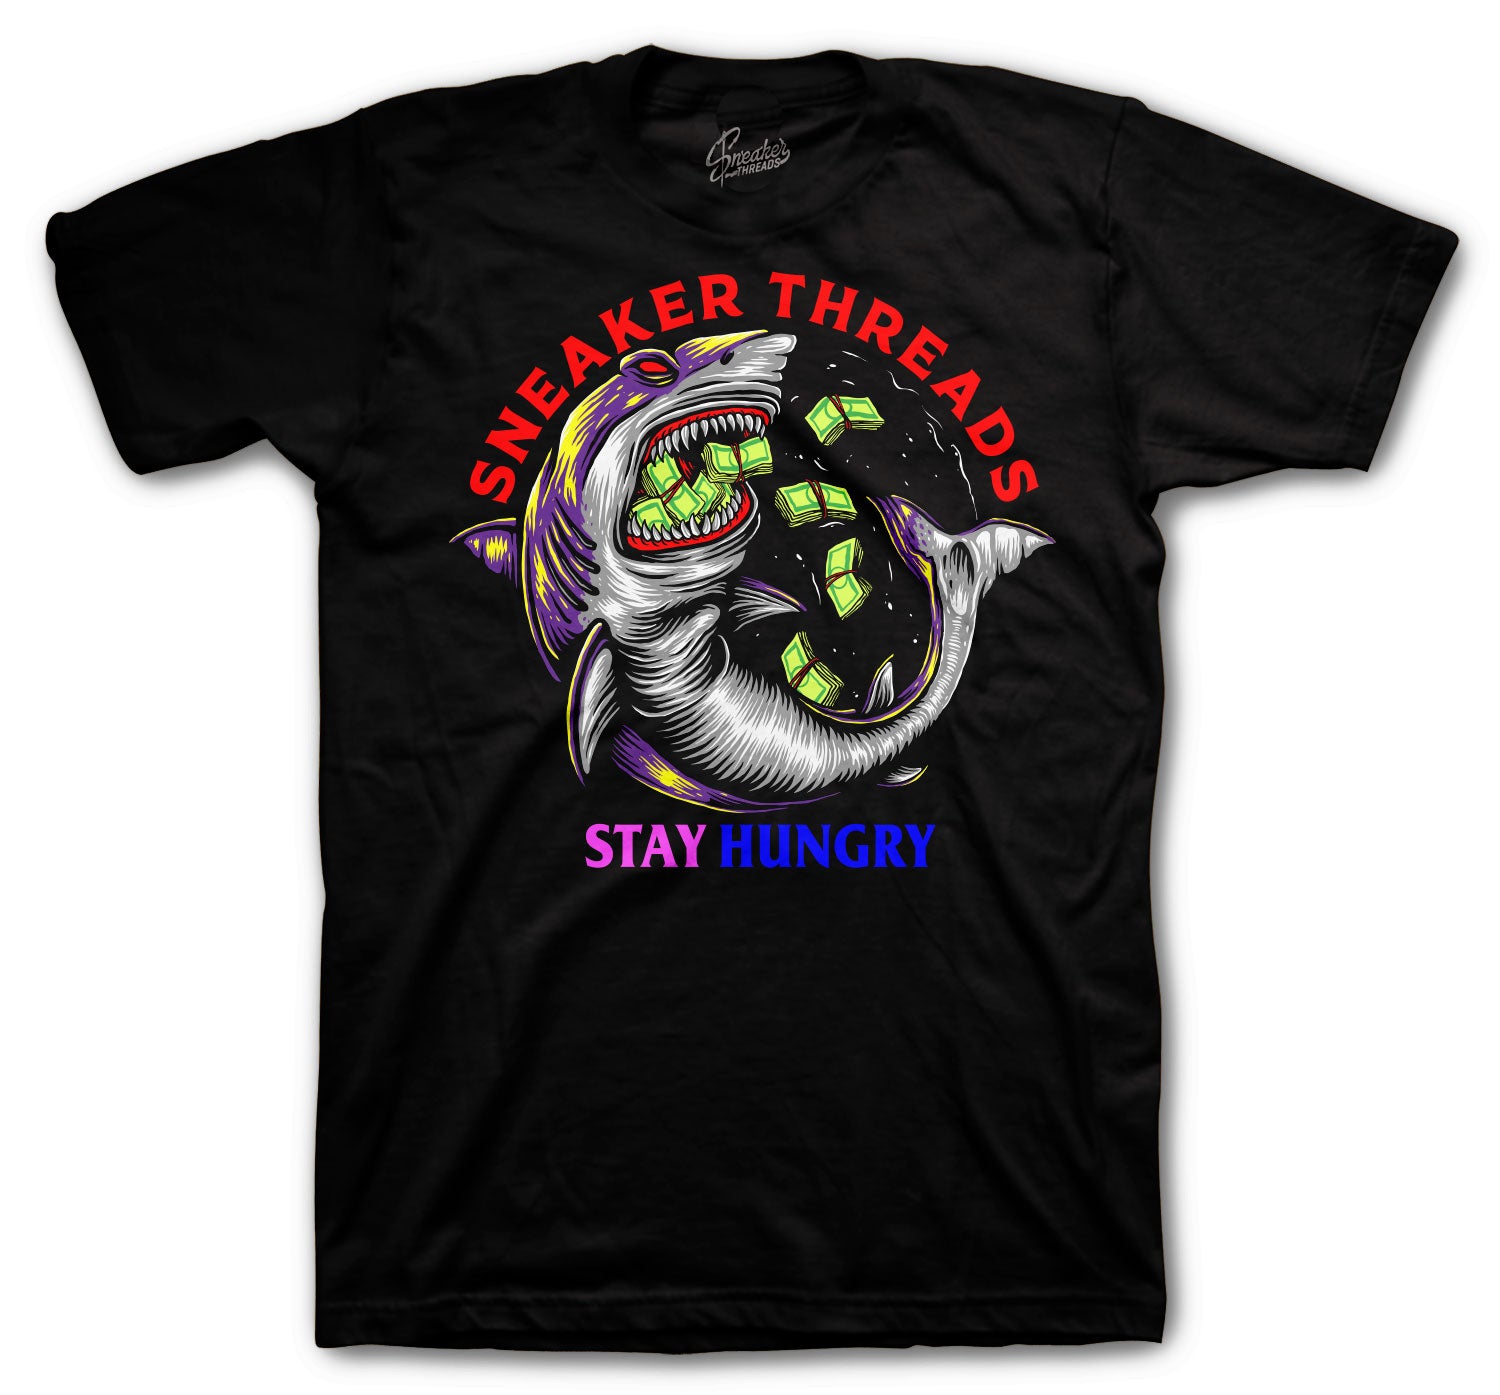 Retro 5 What The Shirt - Stay Hungry - Black